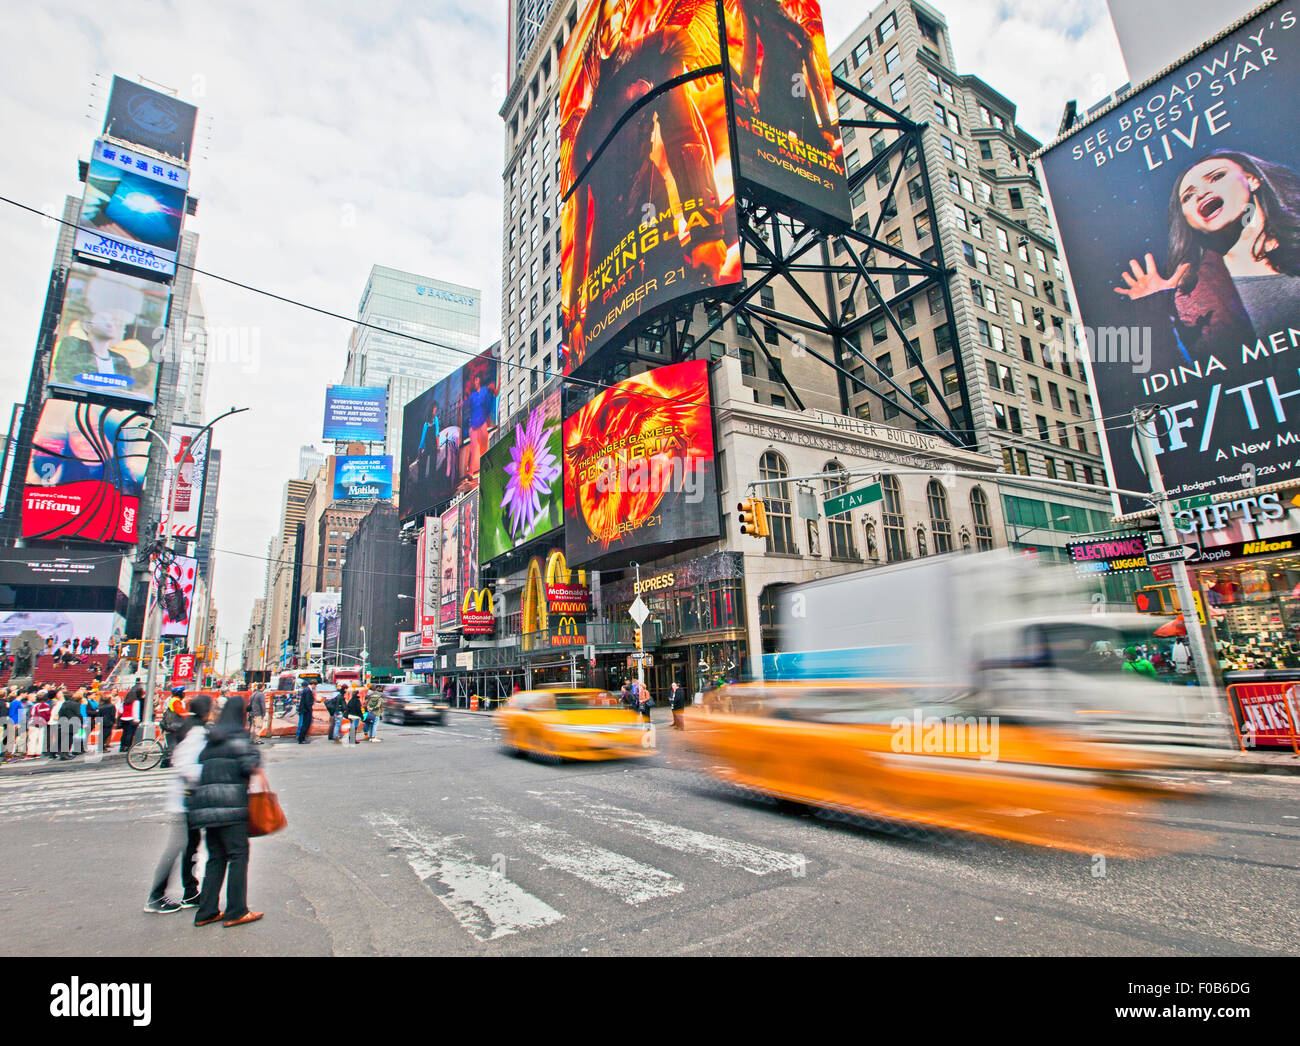 NEW YORK, USA - NOVEMBER 13th, 2014: Traffic driving through New York's famous Times Square area with colorful signage. Stock Photo